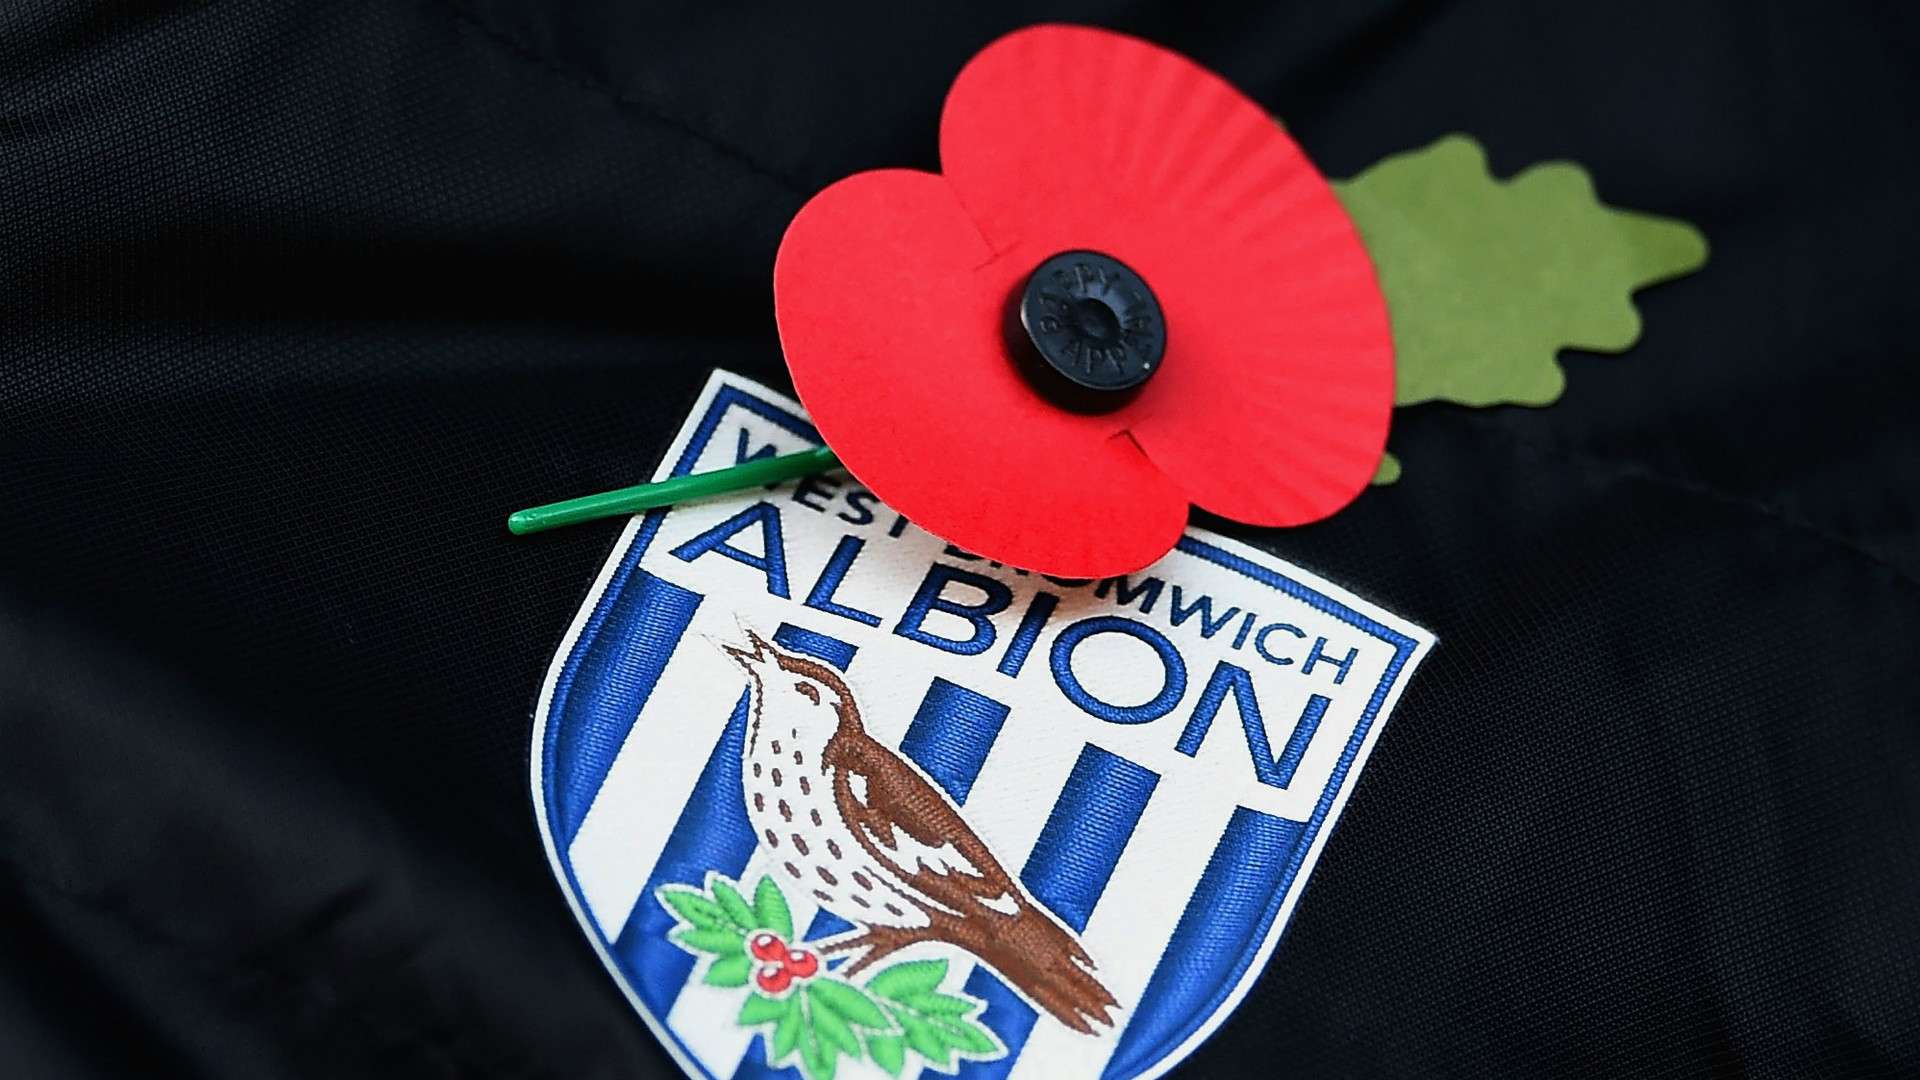 Remembrance Day Poppy on West Bromwich Albion badge 09112014